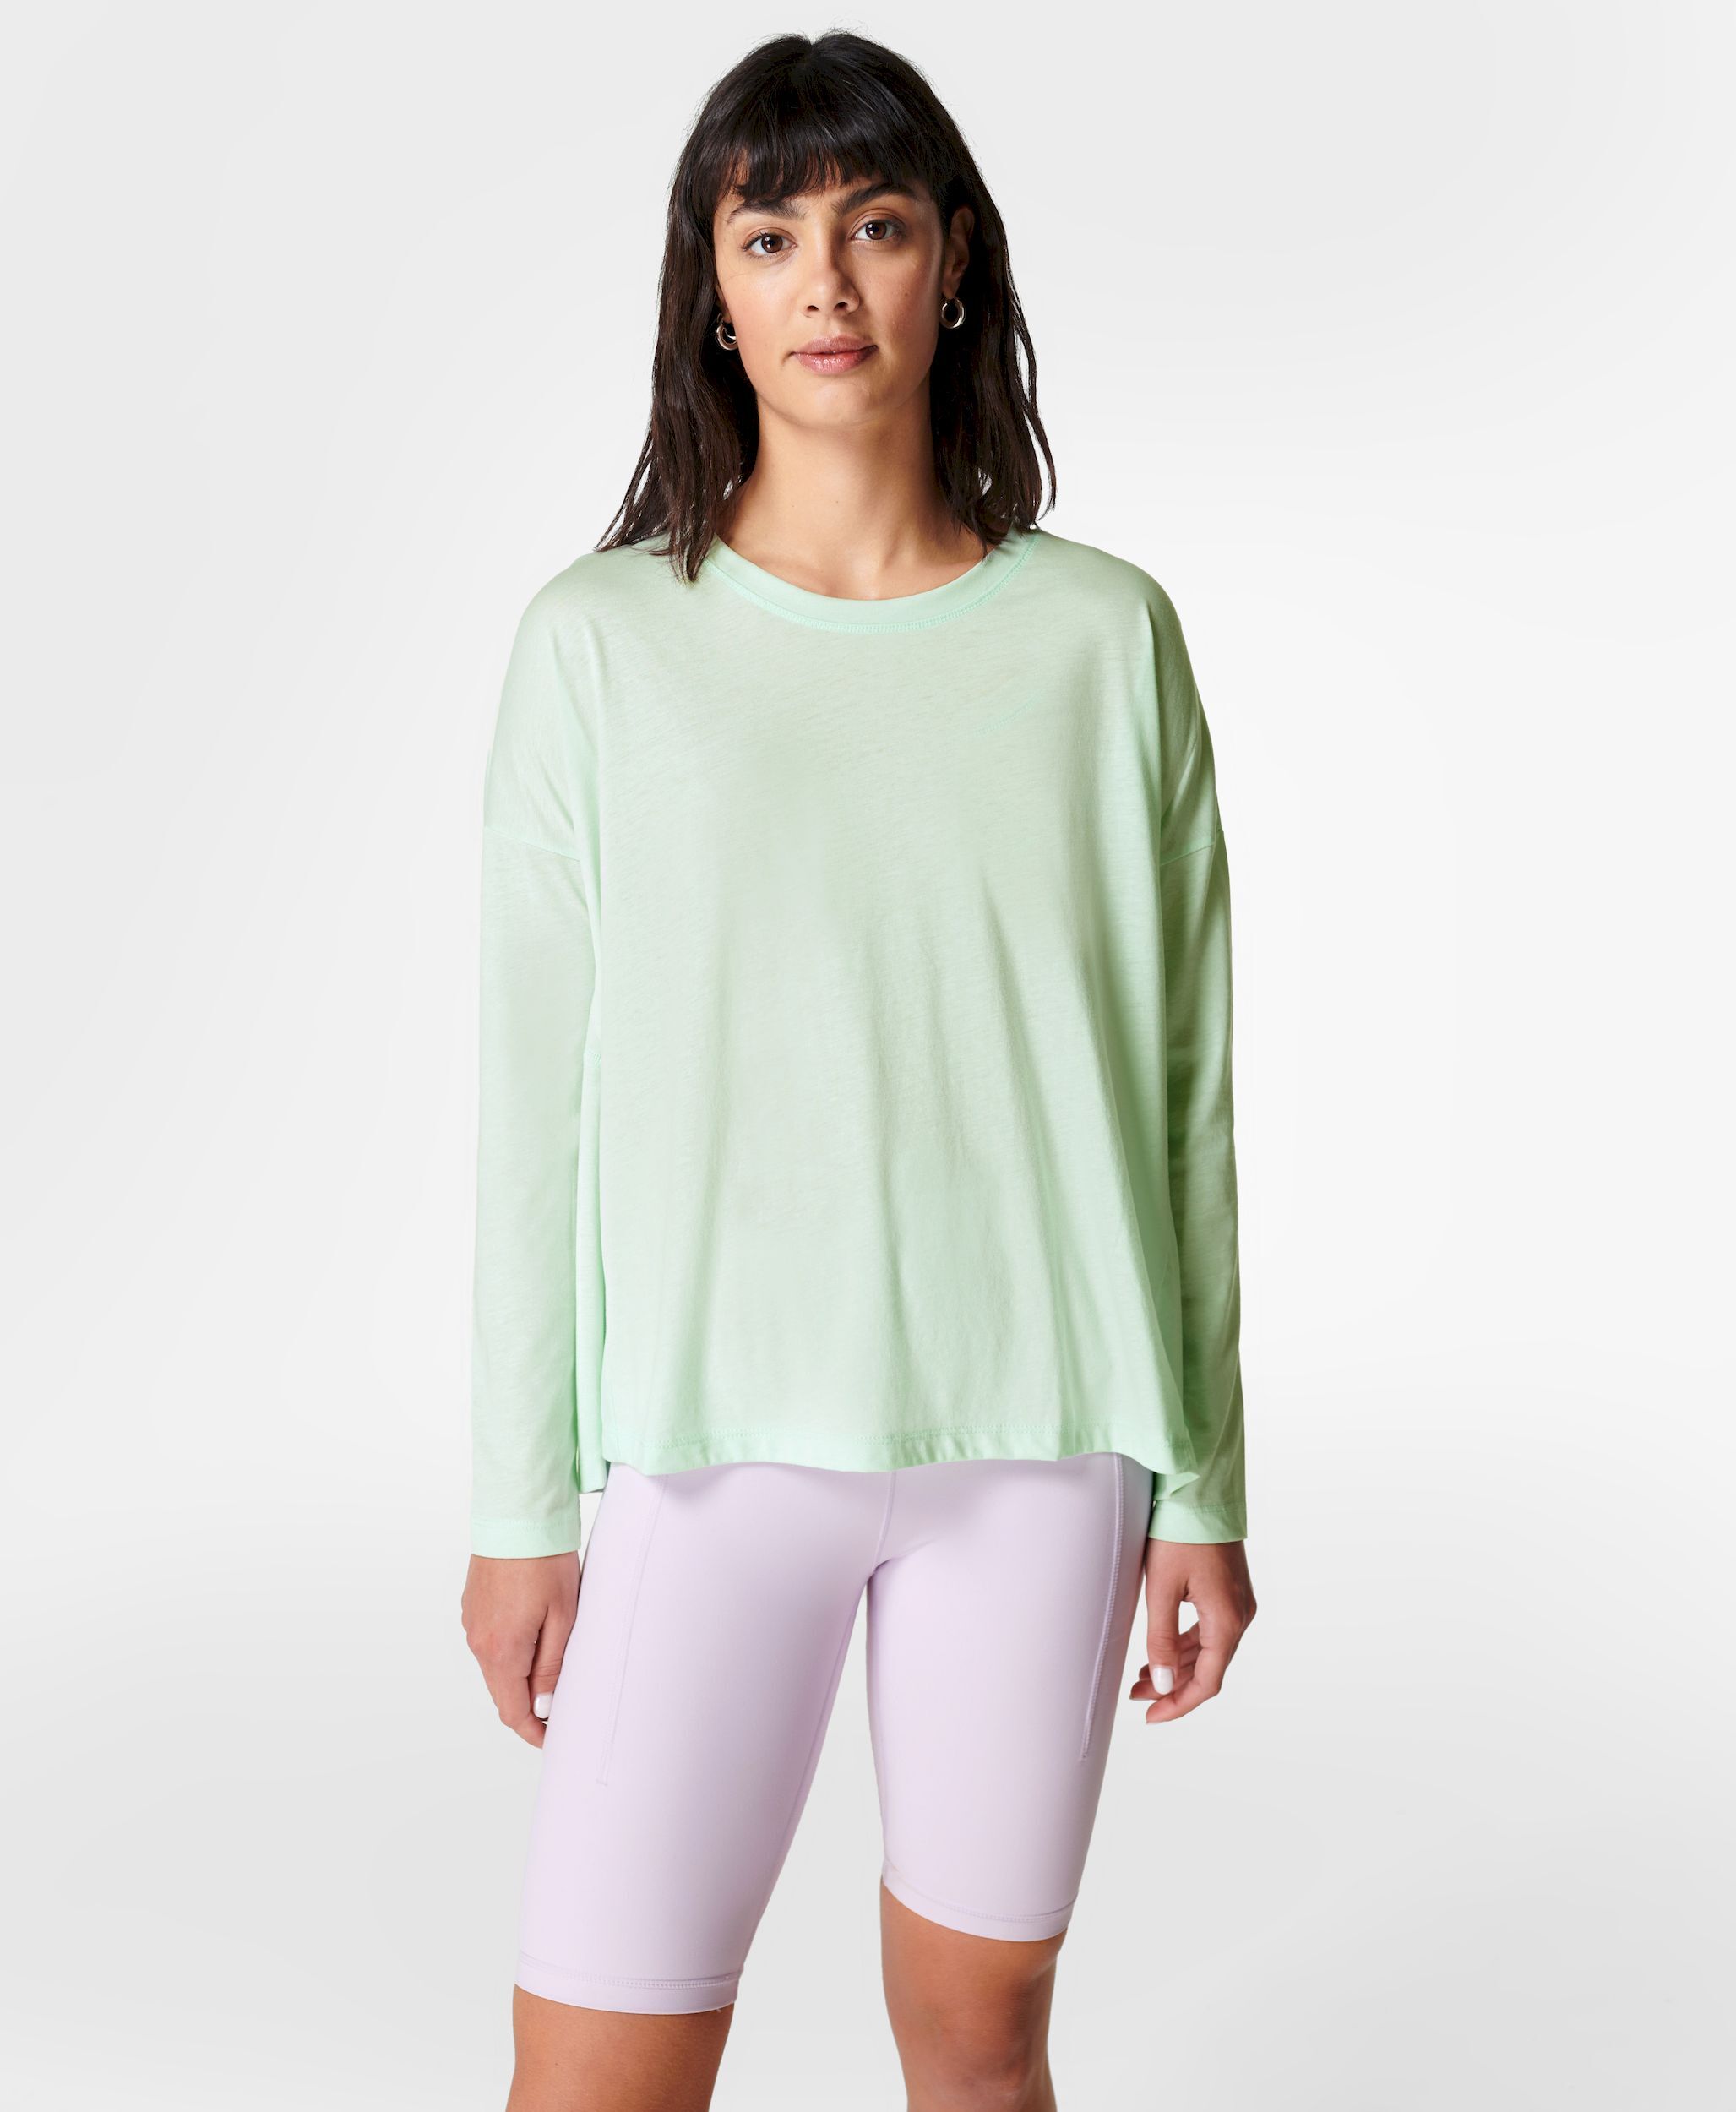 Sweaty Betty Easy Peazy Sustainable Top - T-shirt - Dames